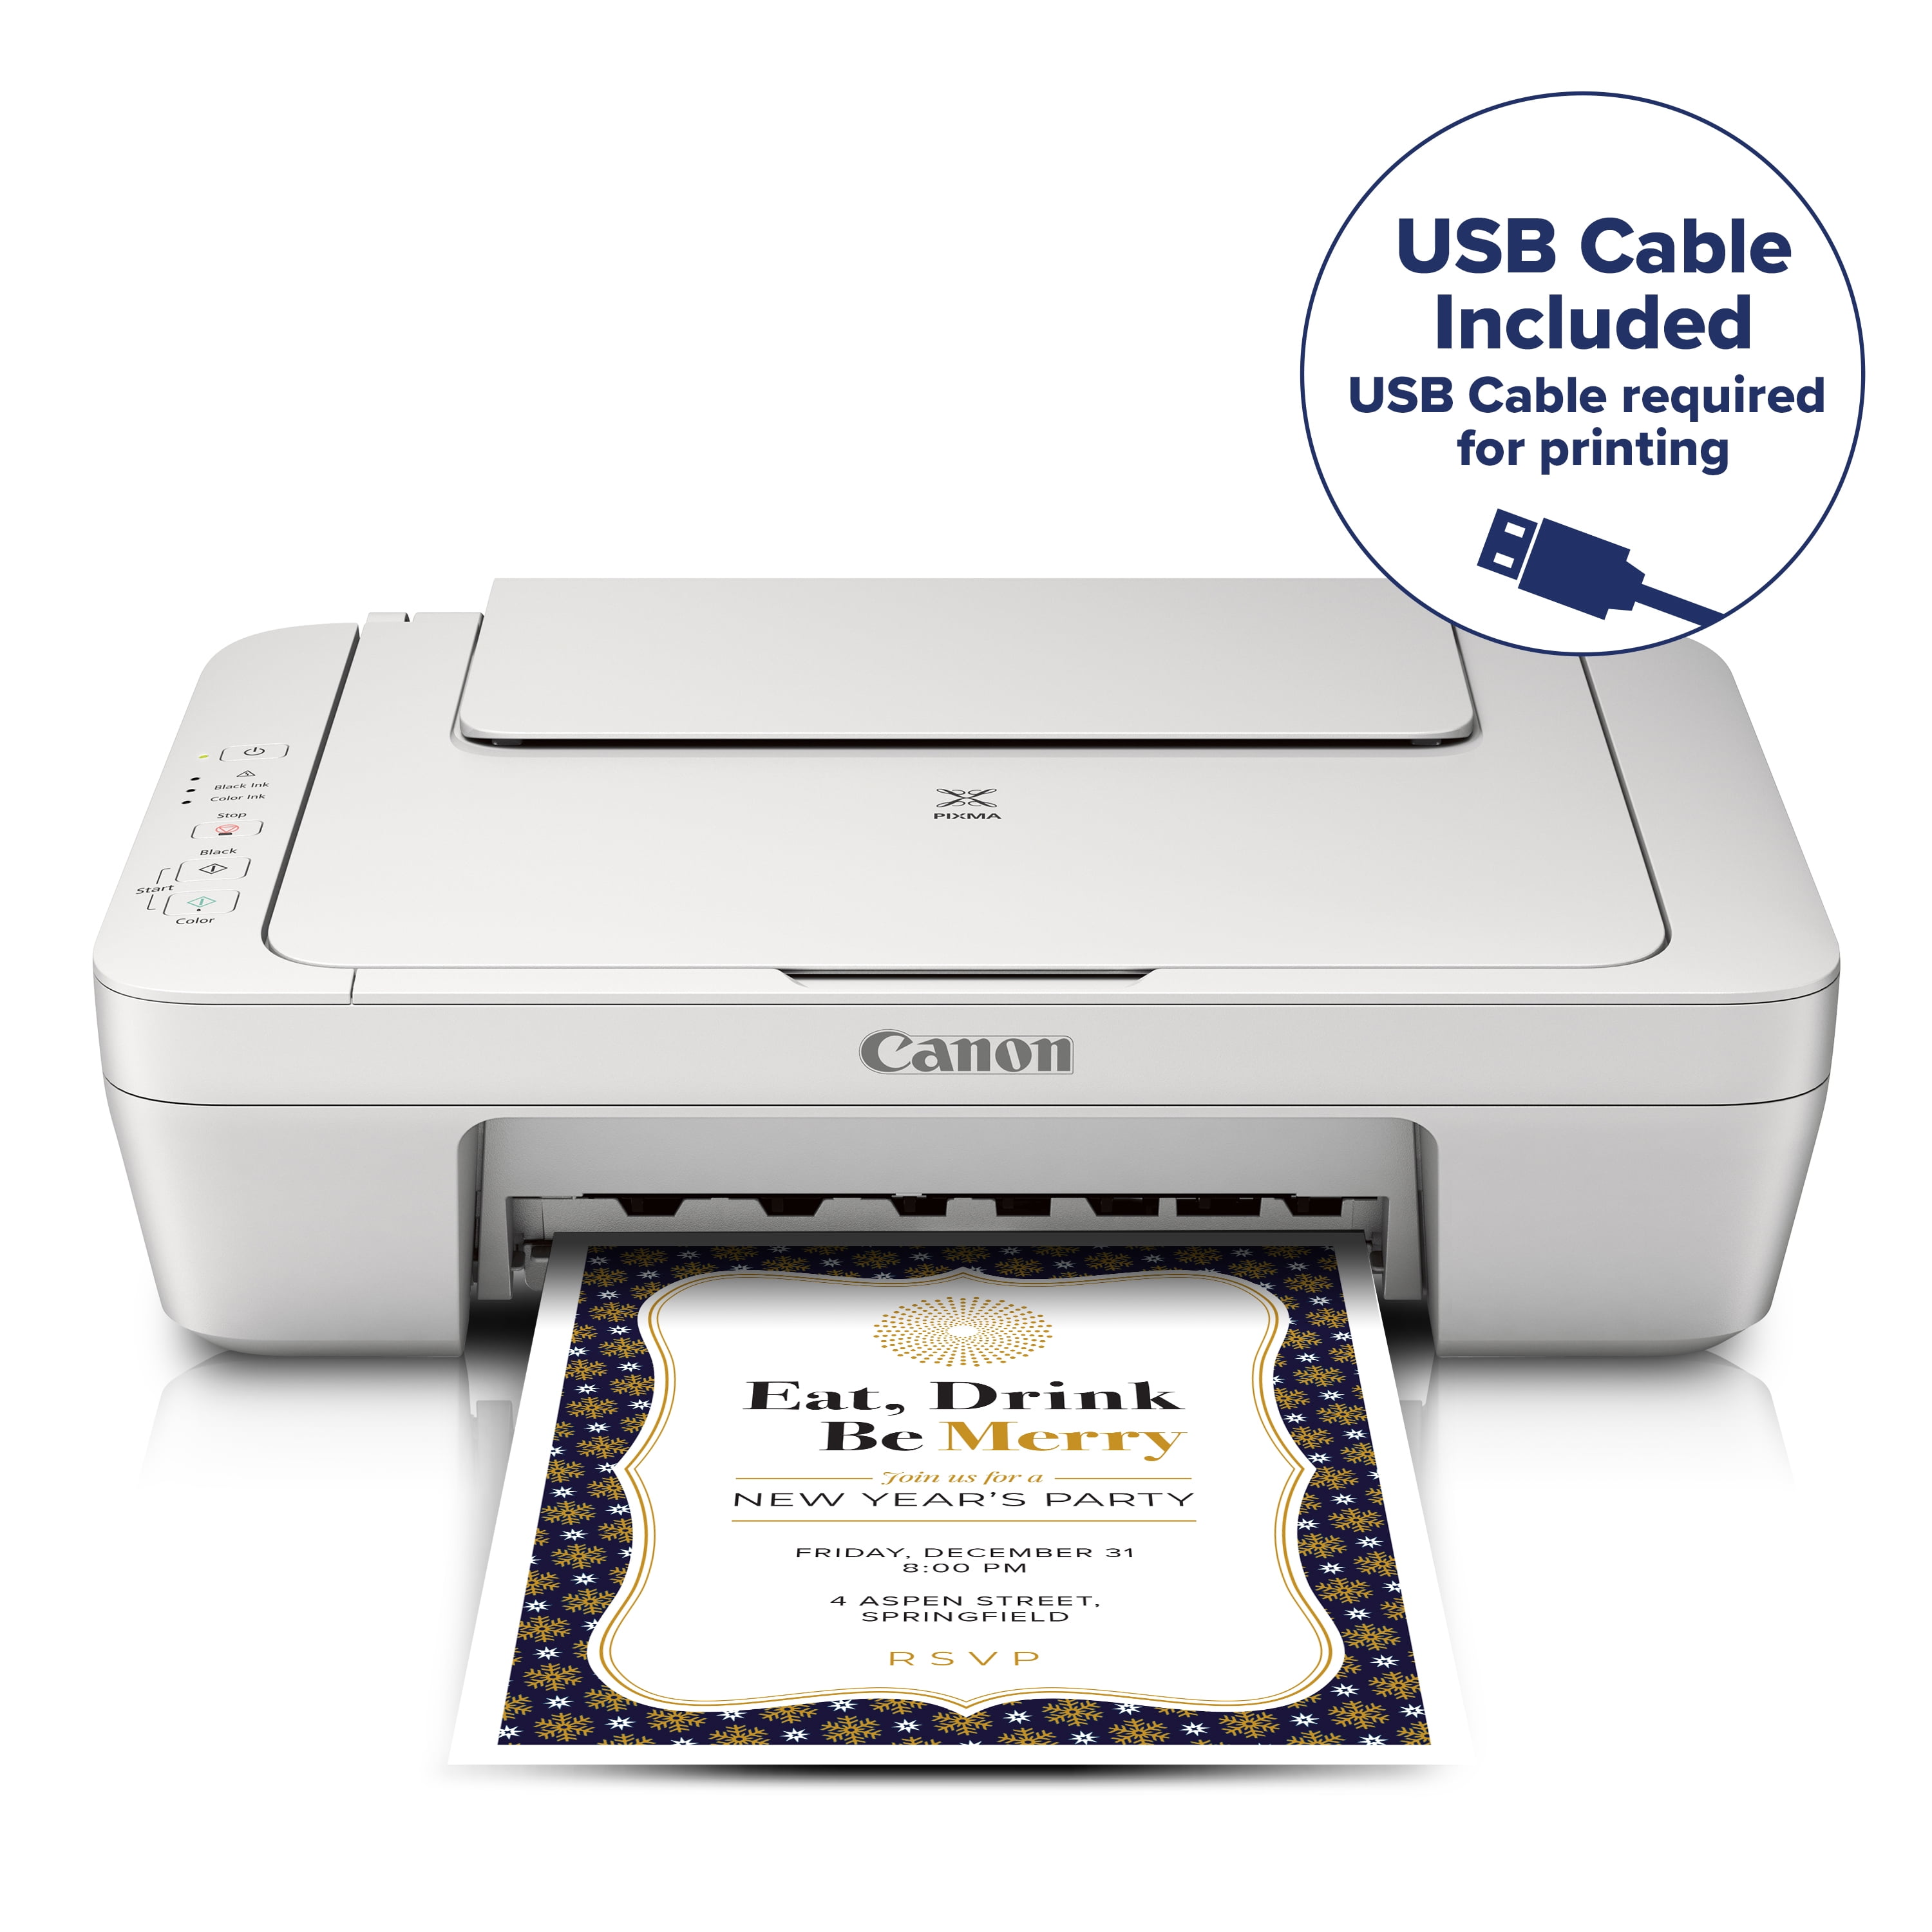 Canon PIXMA MG2522 Wired All-in-One Color Inkjet Printer Cable Included], White - Walmart.com